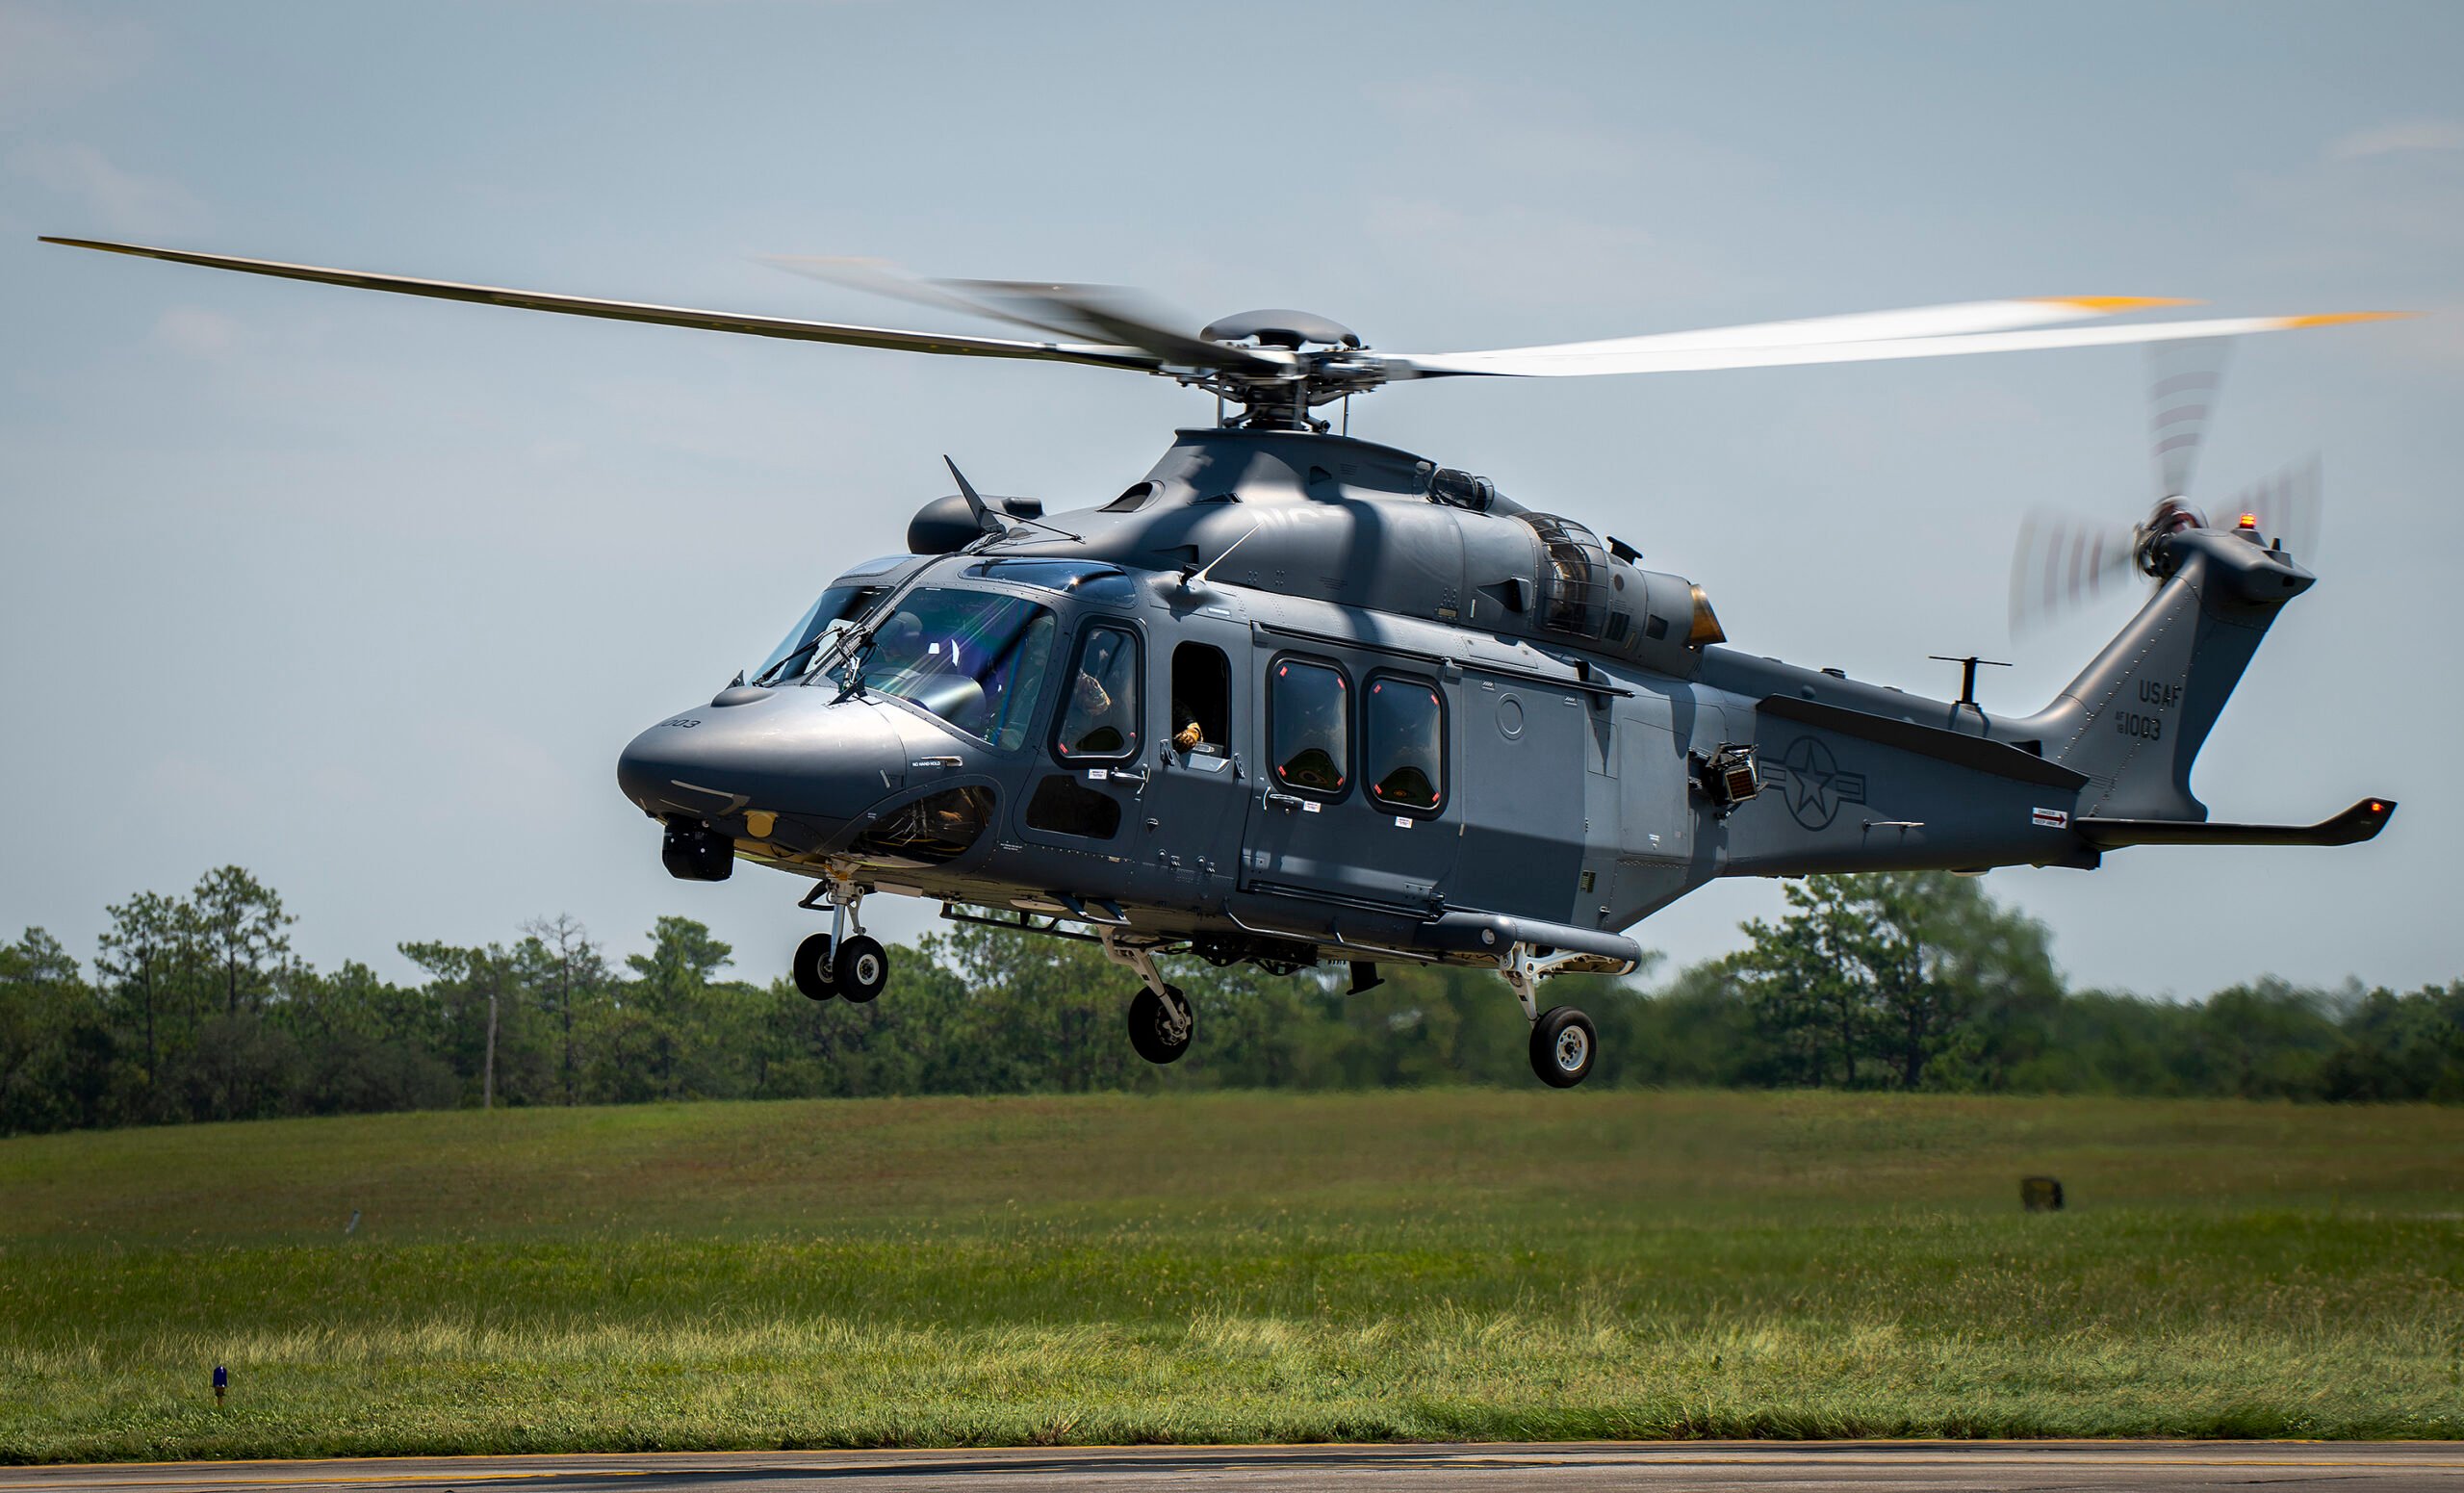 Vervanging UH-1N Twin Huey: Boeing levert MH-139A Gray Wolf helikopters aan de Amerikaanse luchtmacht